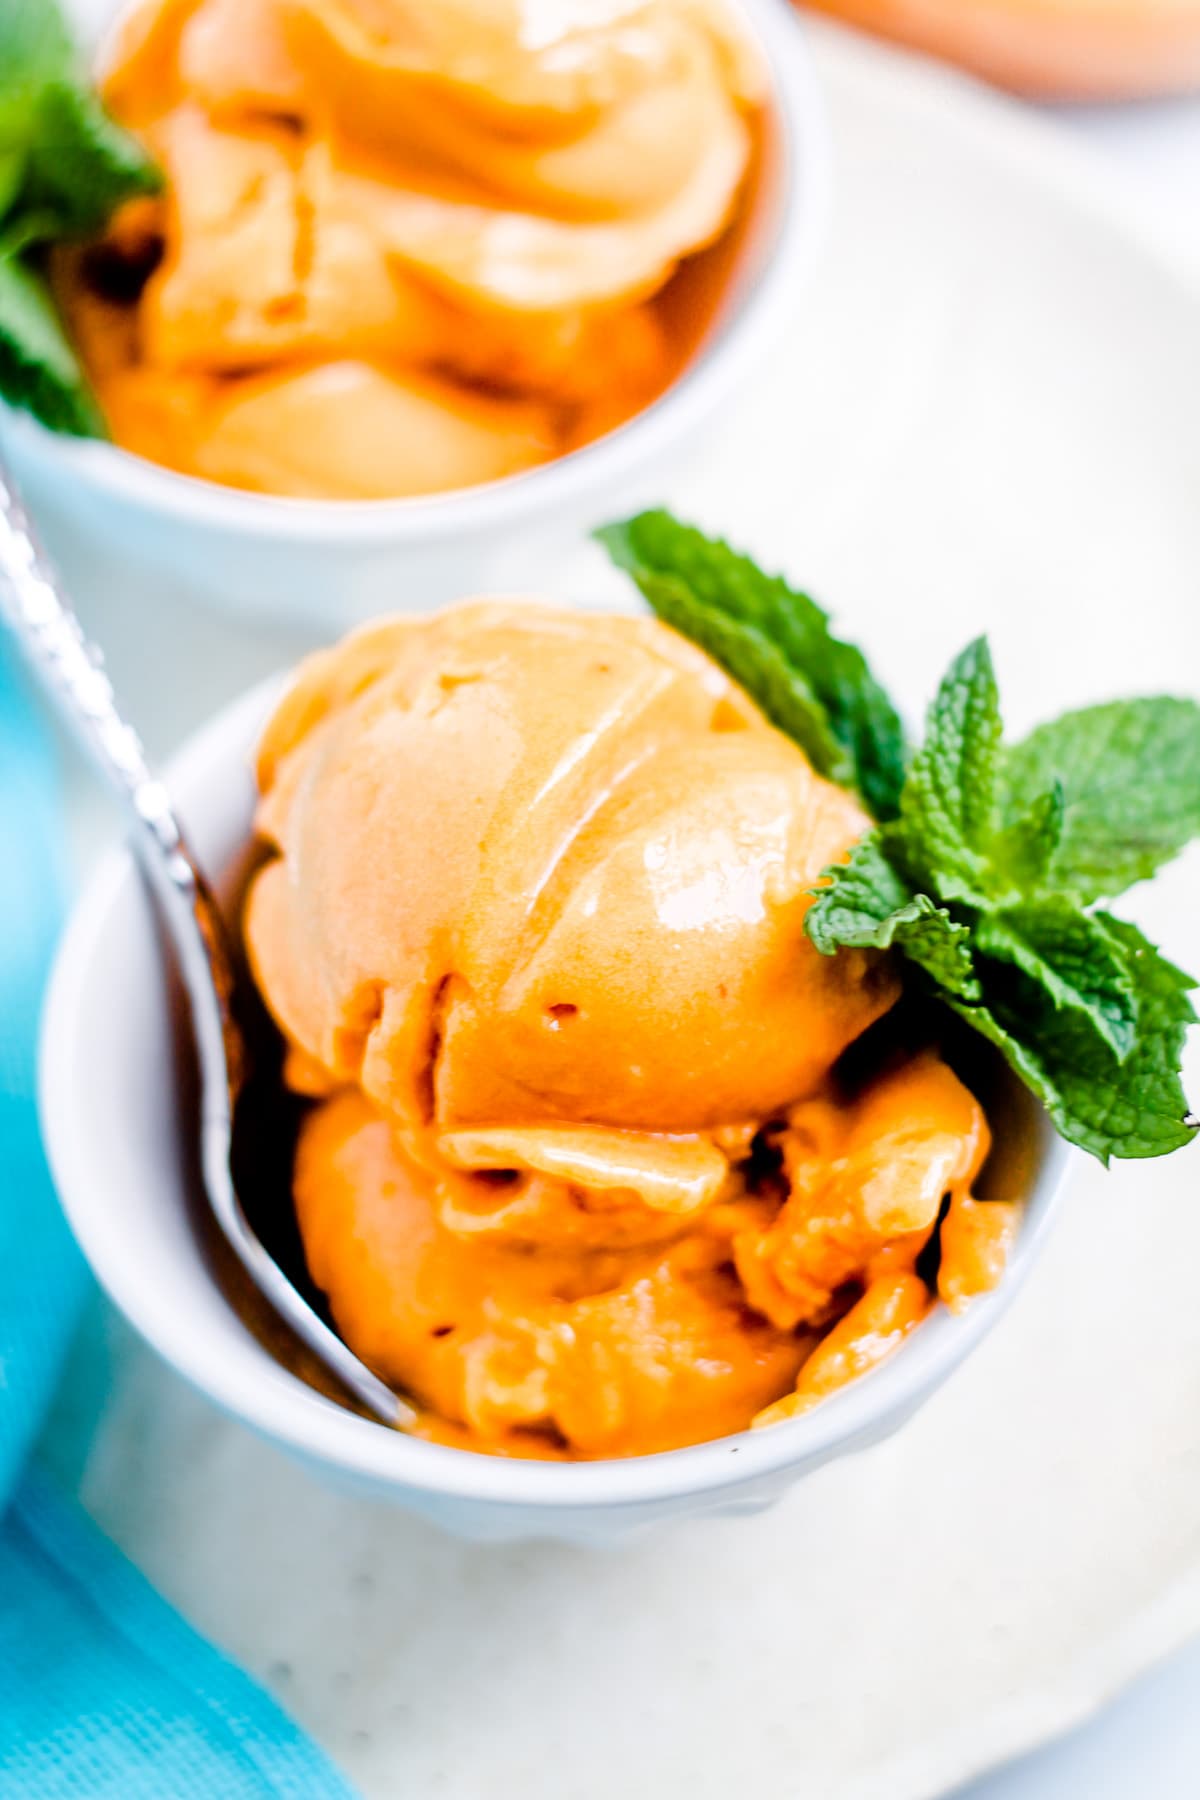 A spoon in a bowl of peach sorbet.